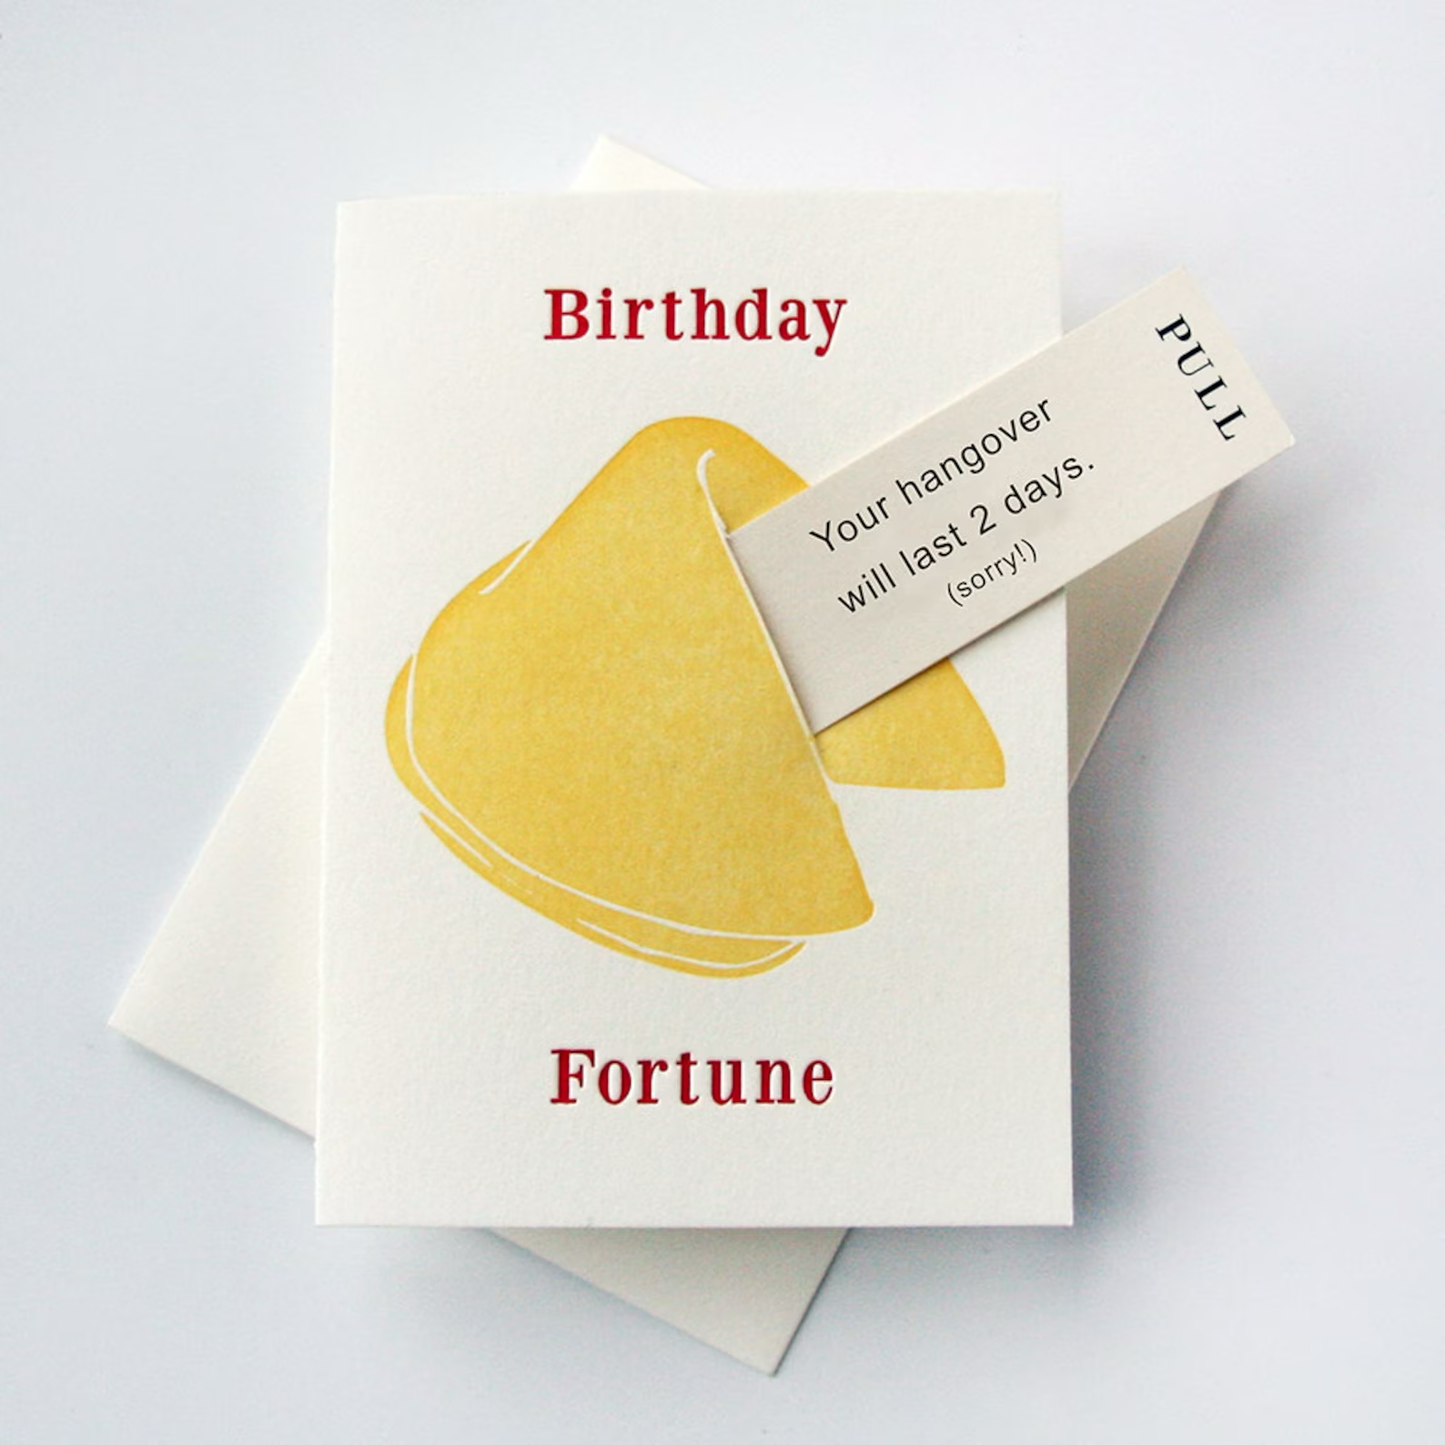 Fortune Cookie birthday - Hangover